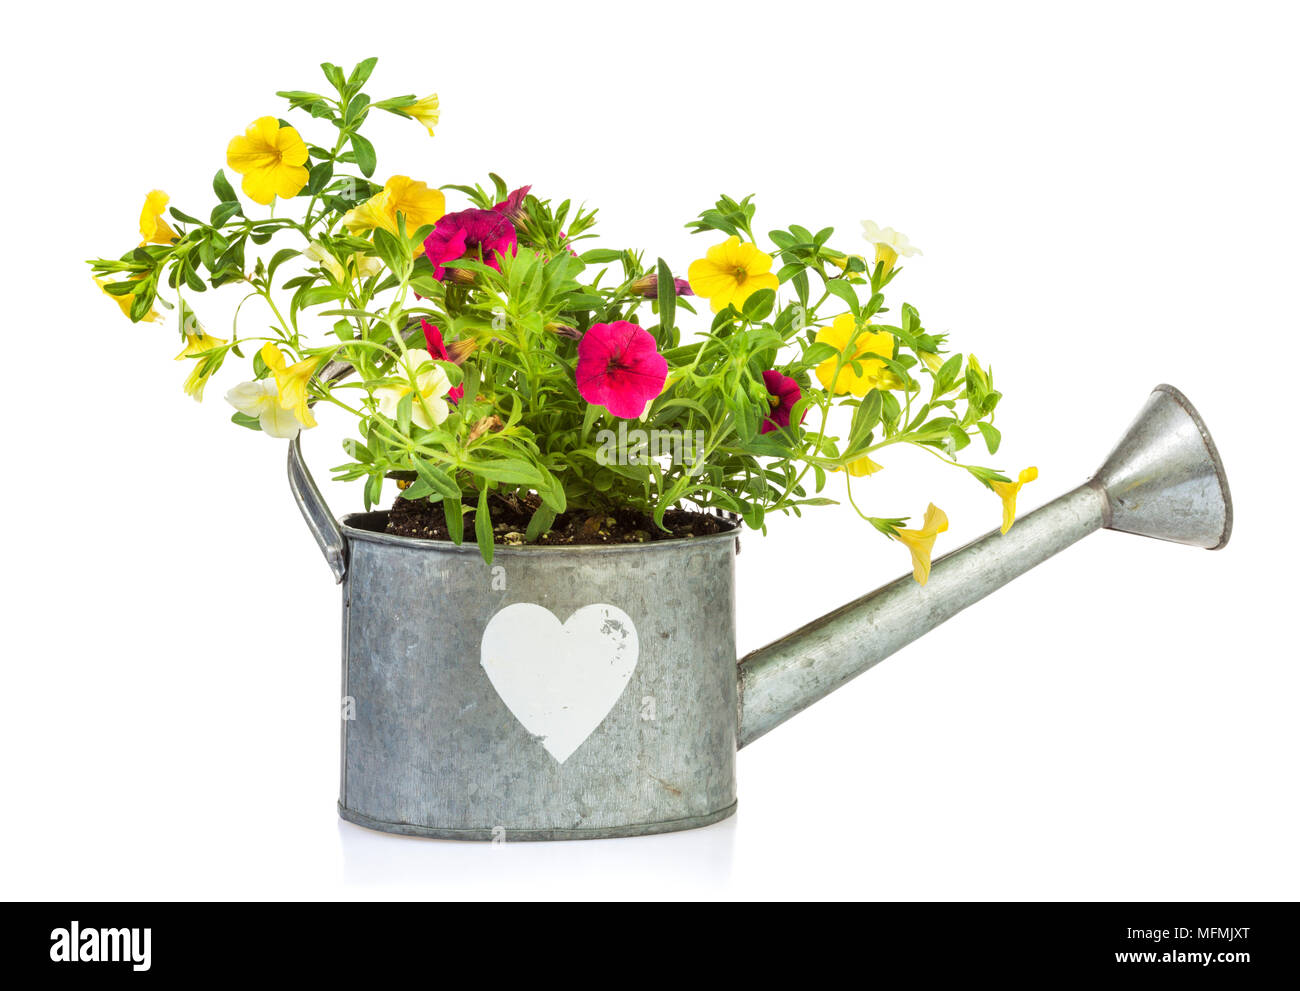 Yellow and purple millionbells flowers planted into tin watering can with heart shape isolated on white background Stock Photo